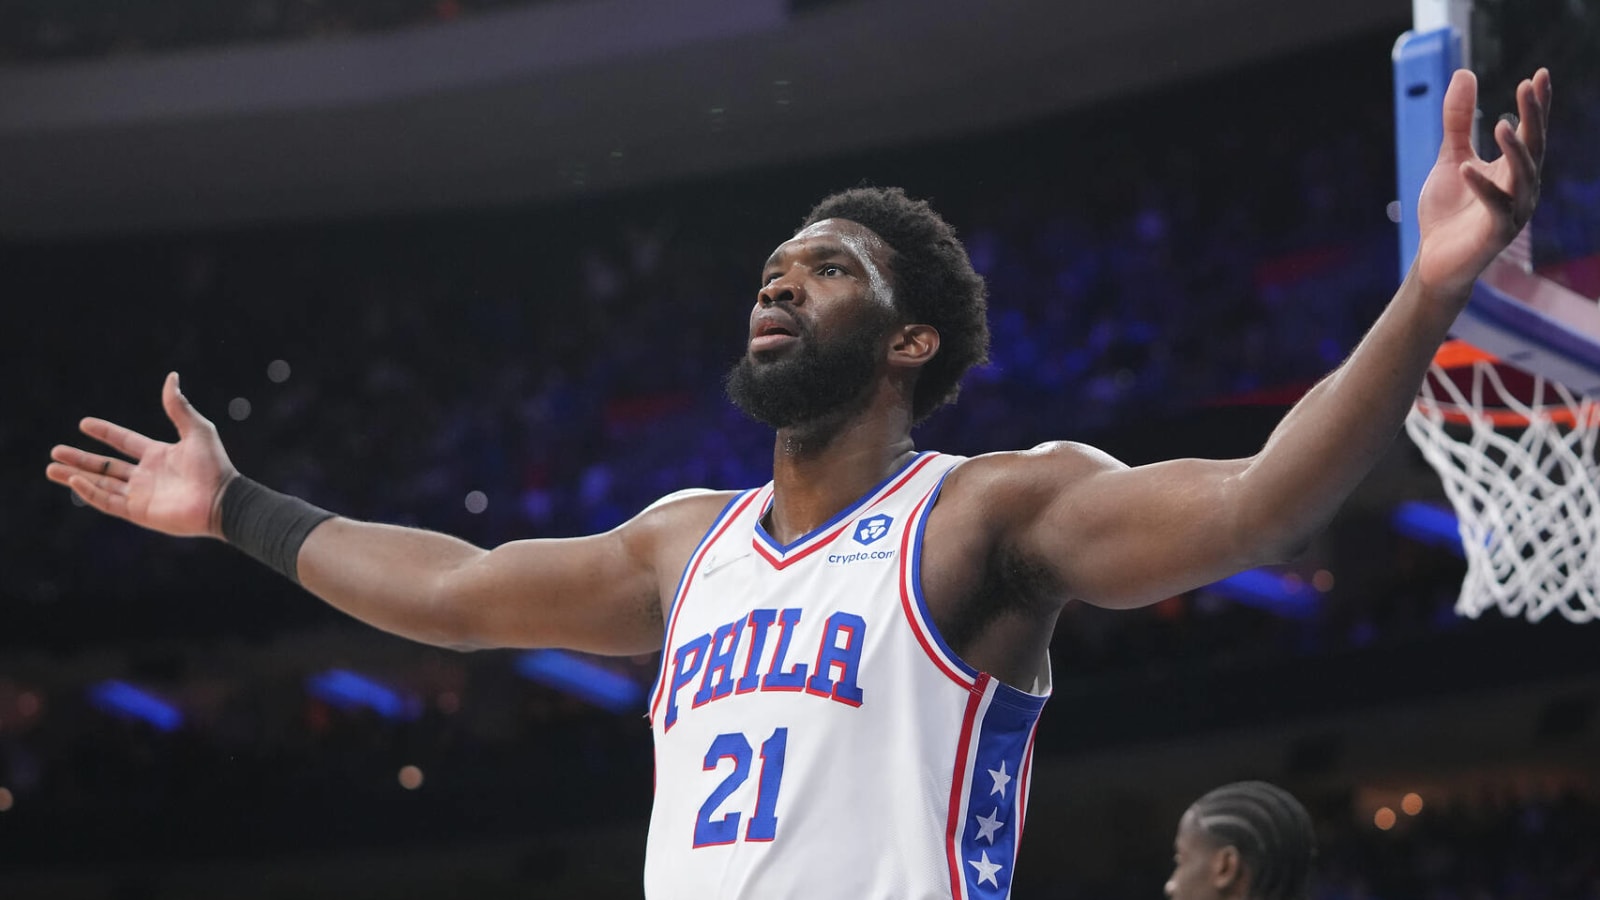 Joel Embiid leads 76ers past Bucks with 42 points, 14 rebounds